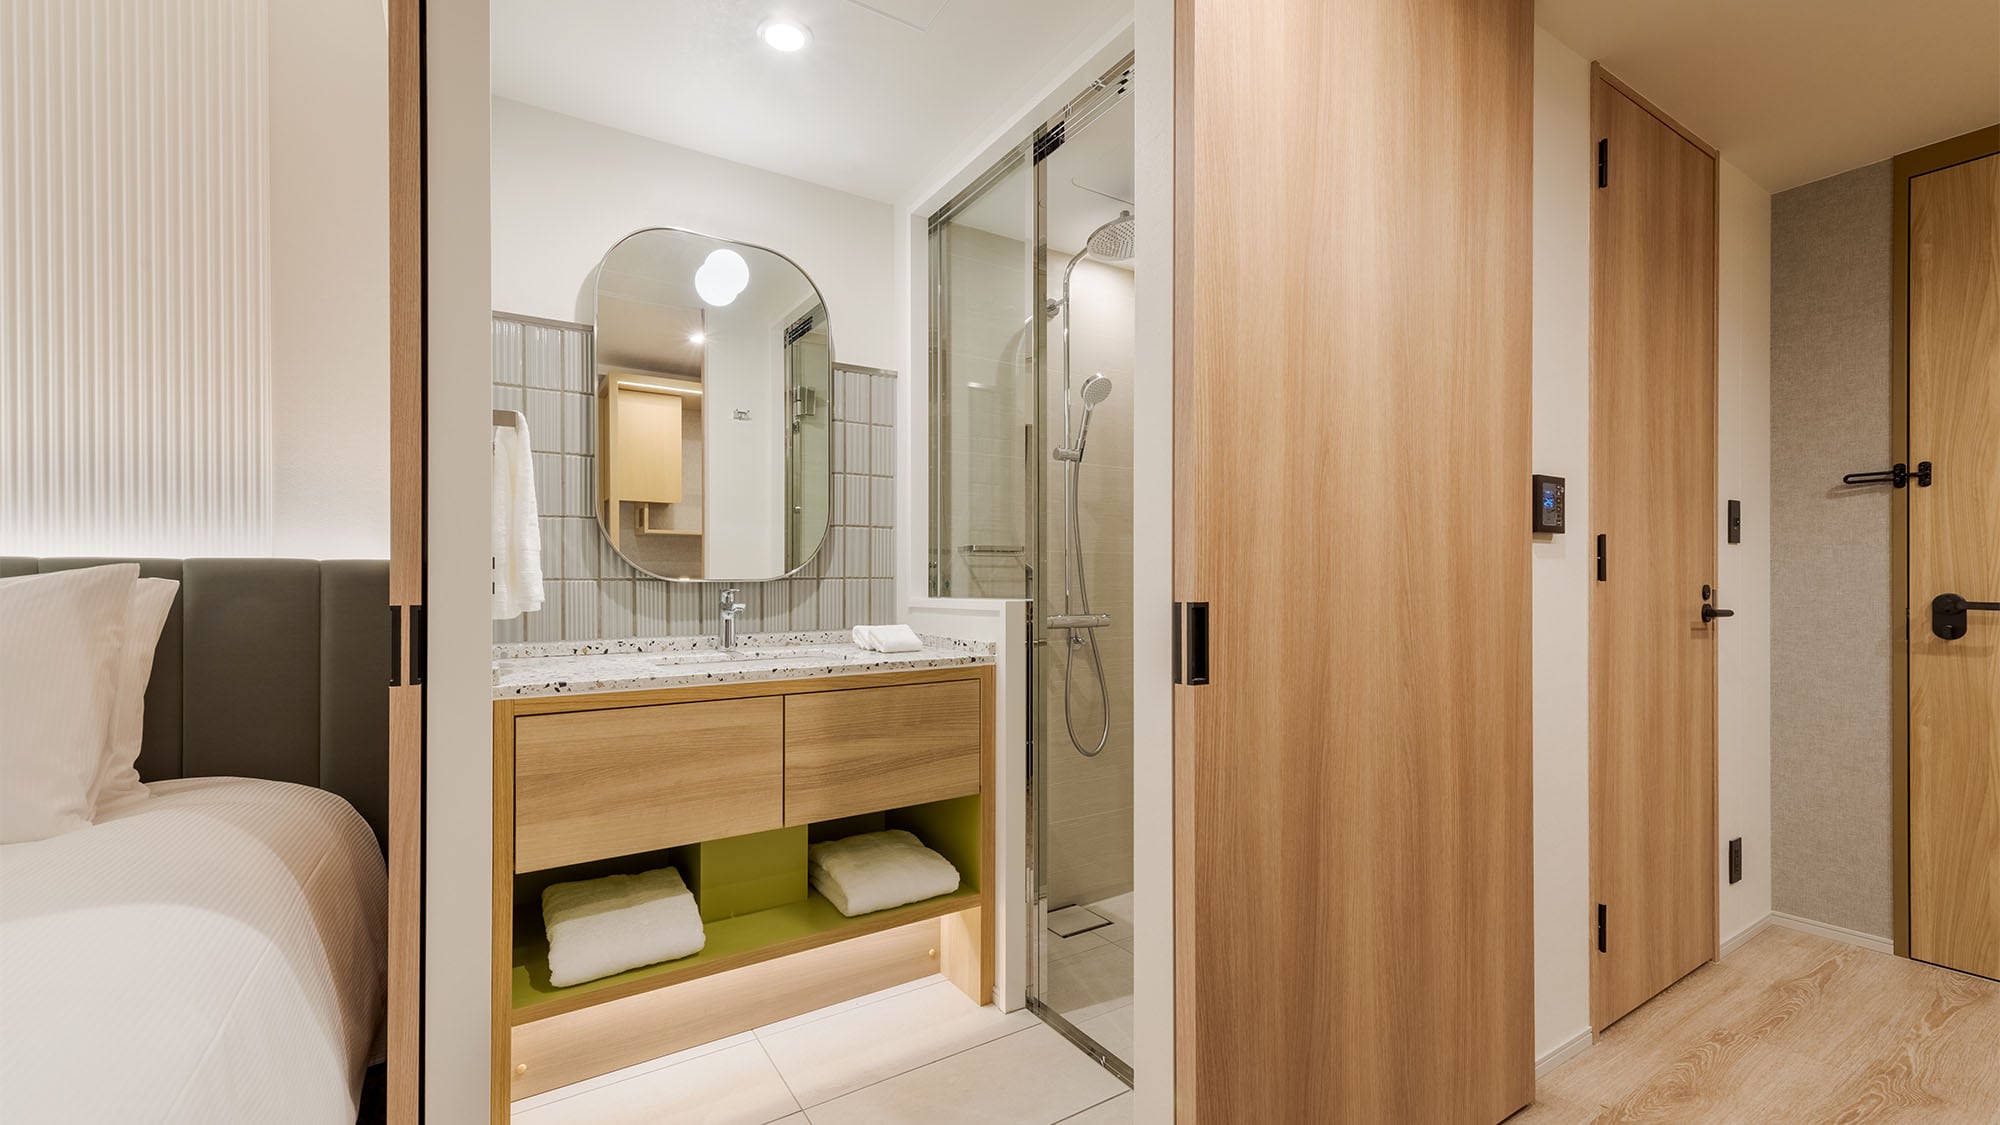 Superior Room (shower booth image)